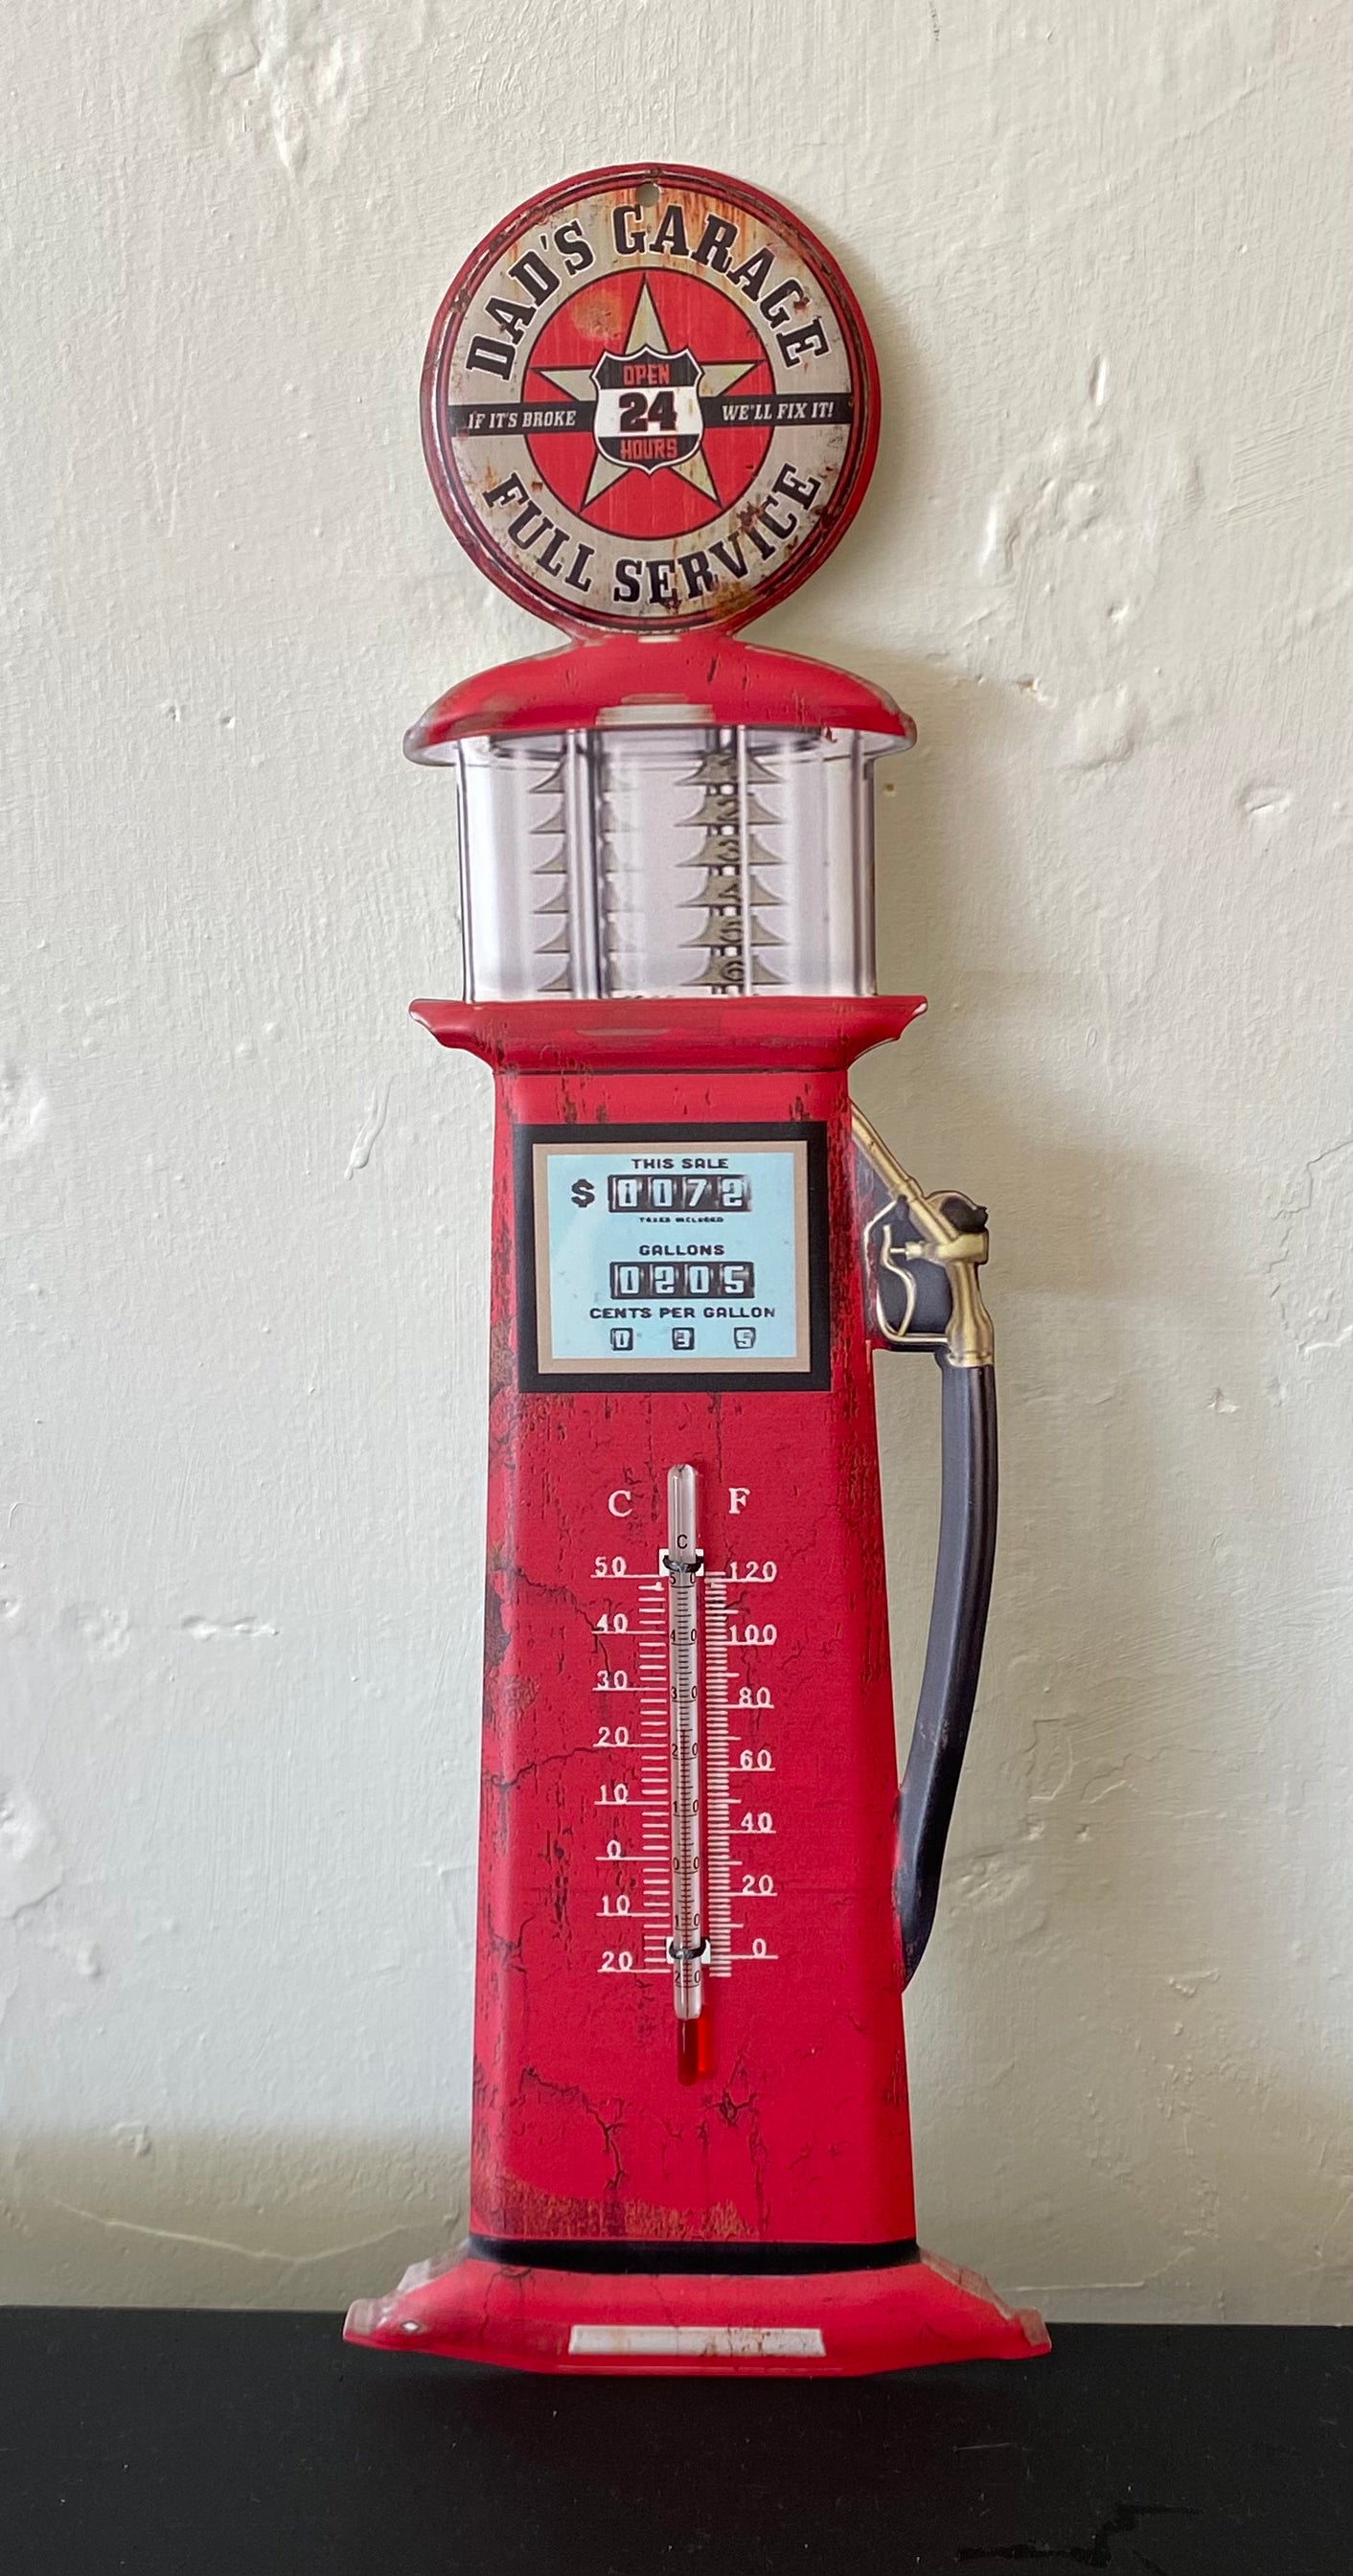 Thermometer (Dads Garage) – Hometown Mercantile on the Square